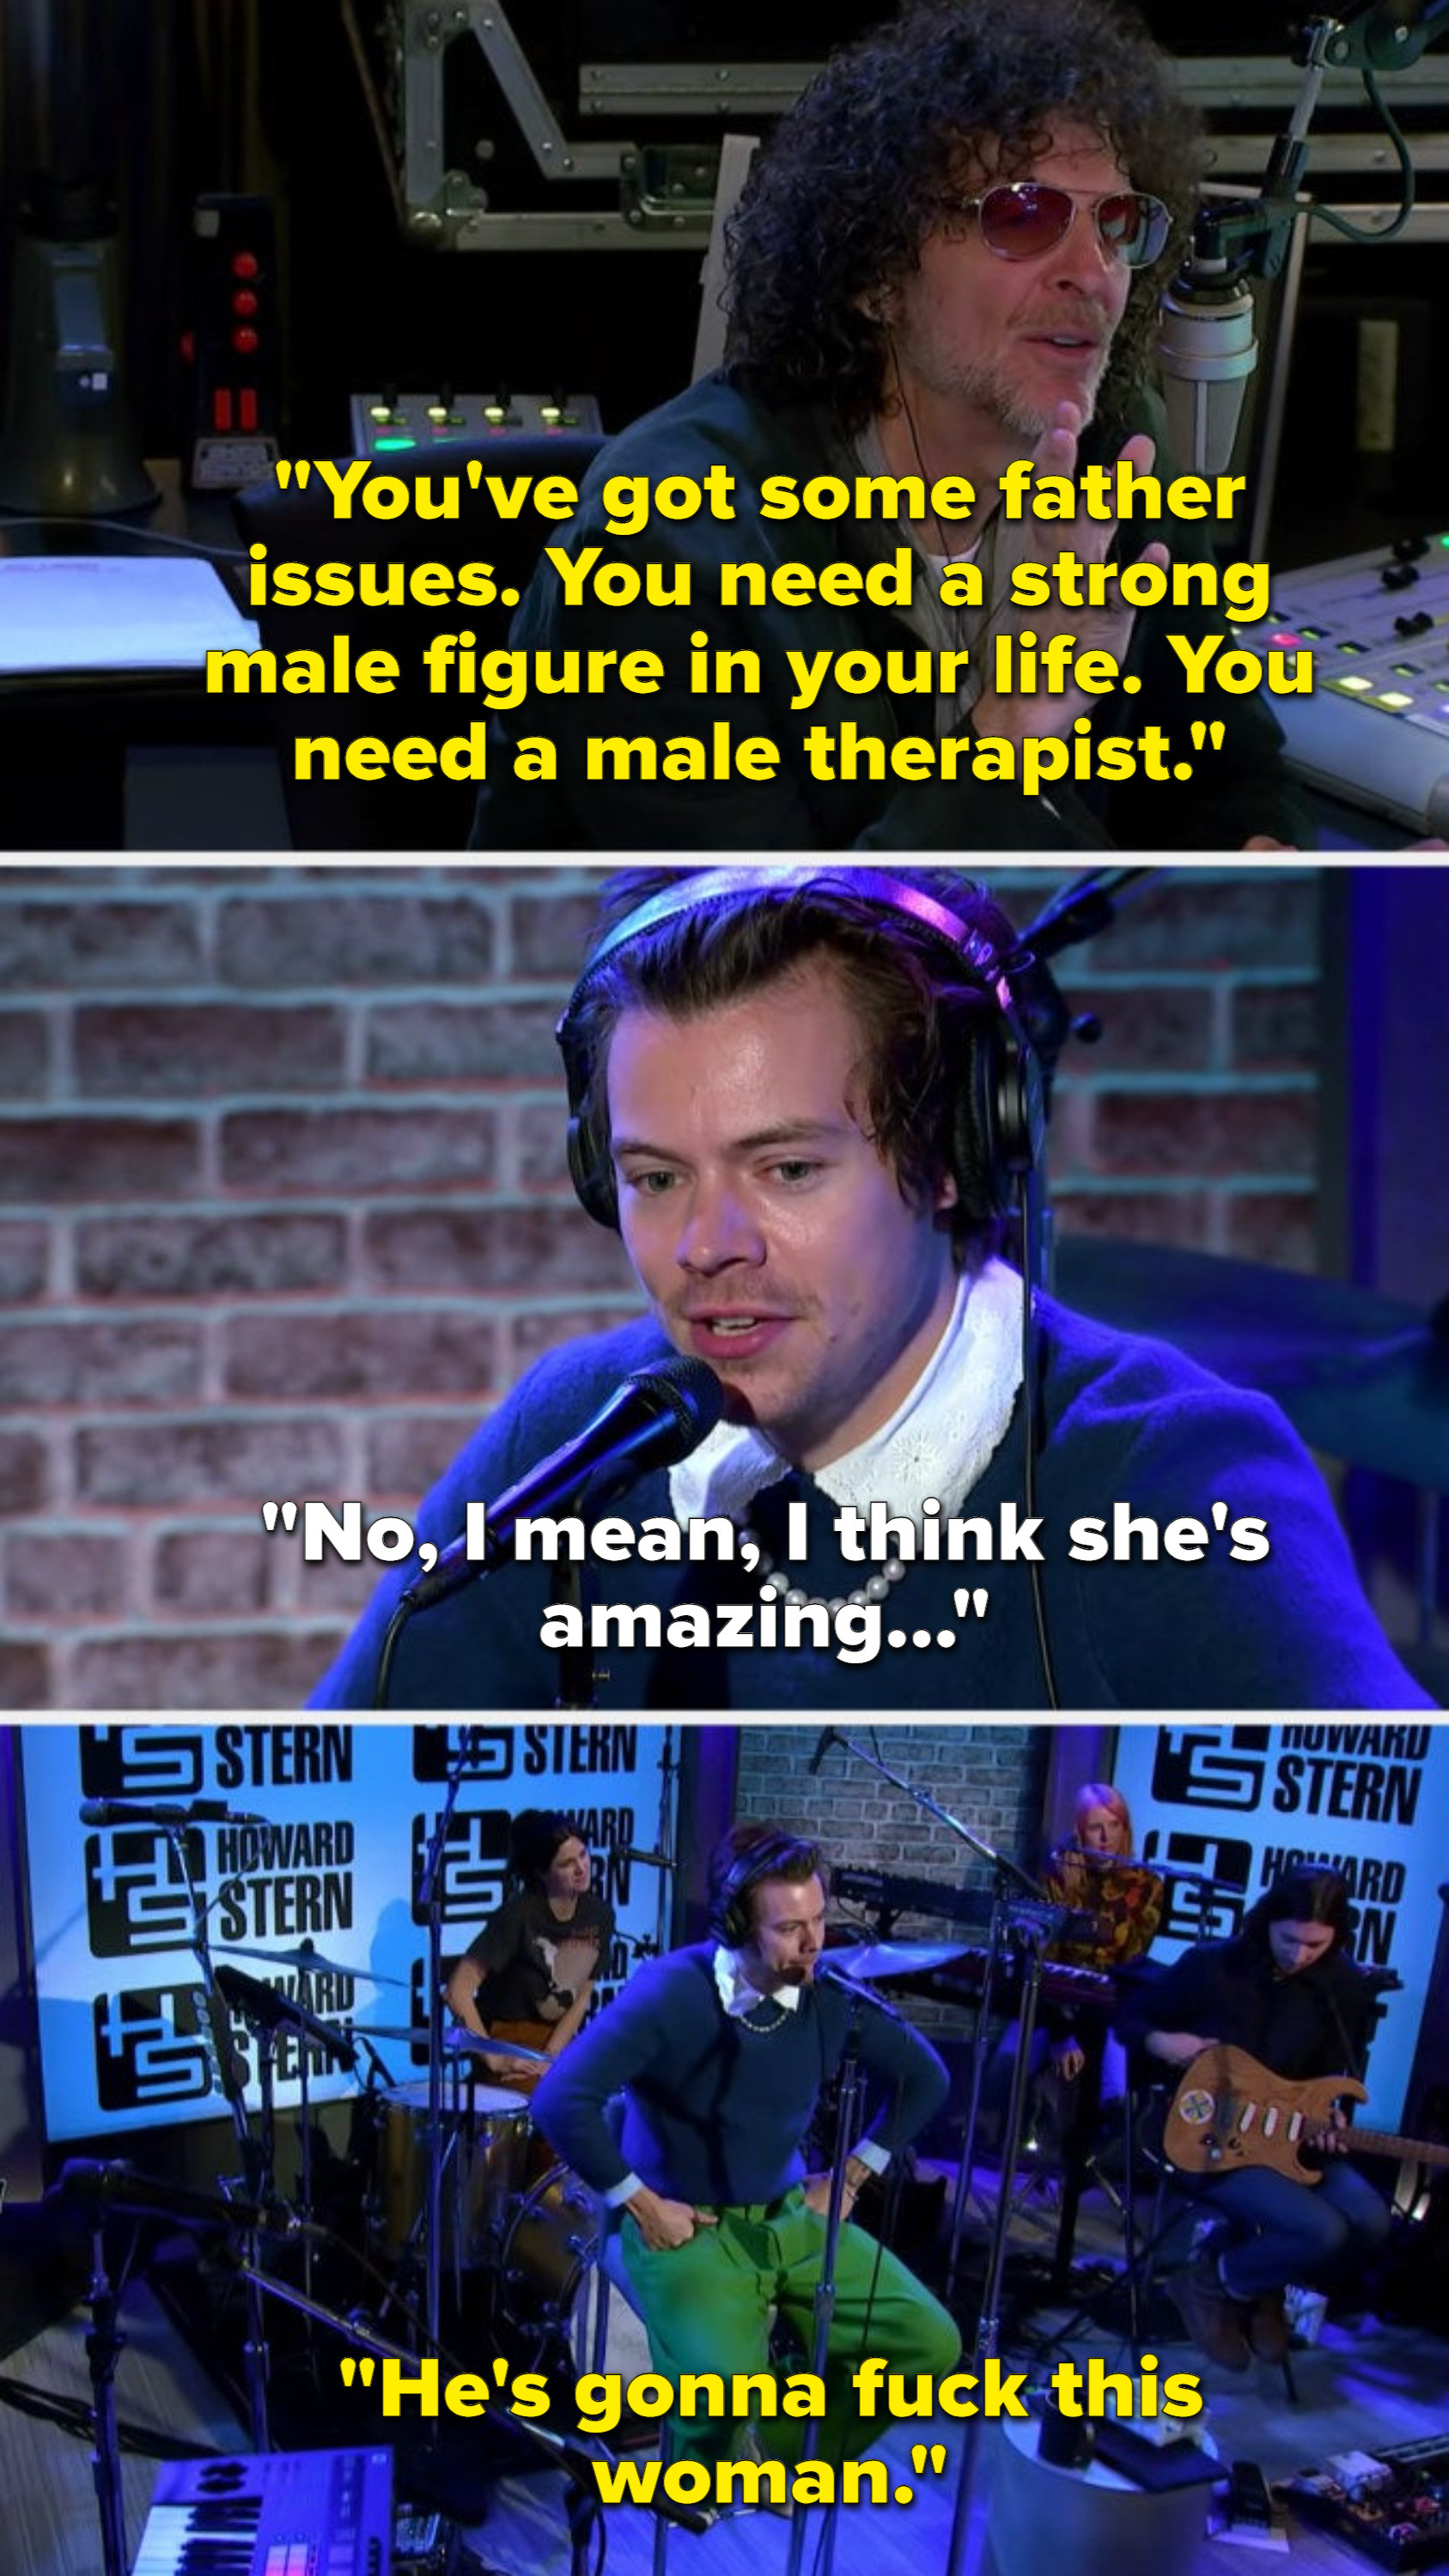 Howard telling harry he should have a male therapist instead, and then making a joke about how harry&#x27;s going to fuck his female therapist